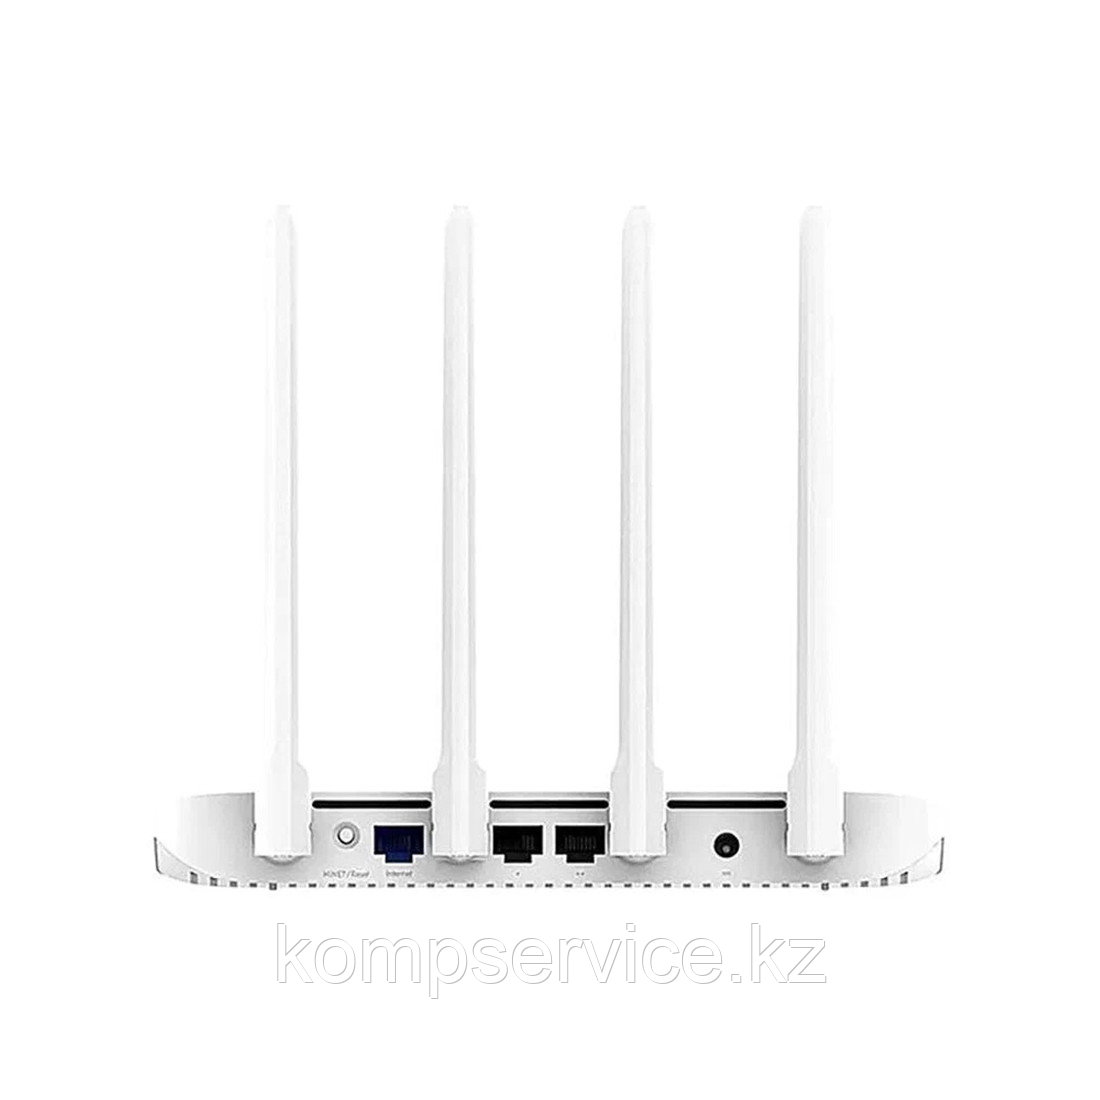 Маршрутизатор Xiaomi Router AC1200 - фото 3 - id-p111639365